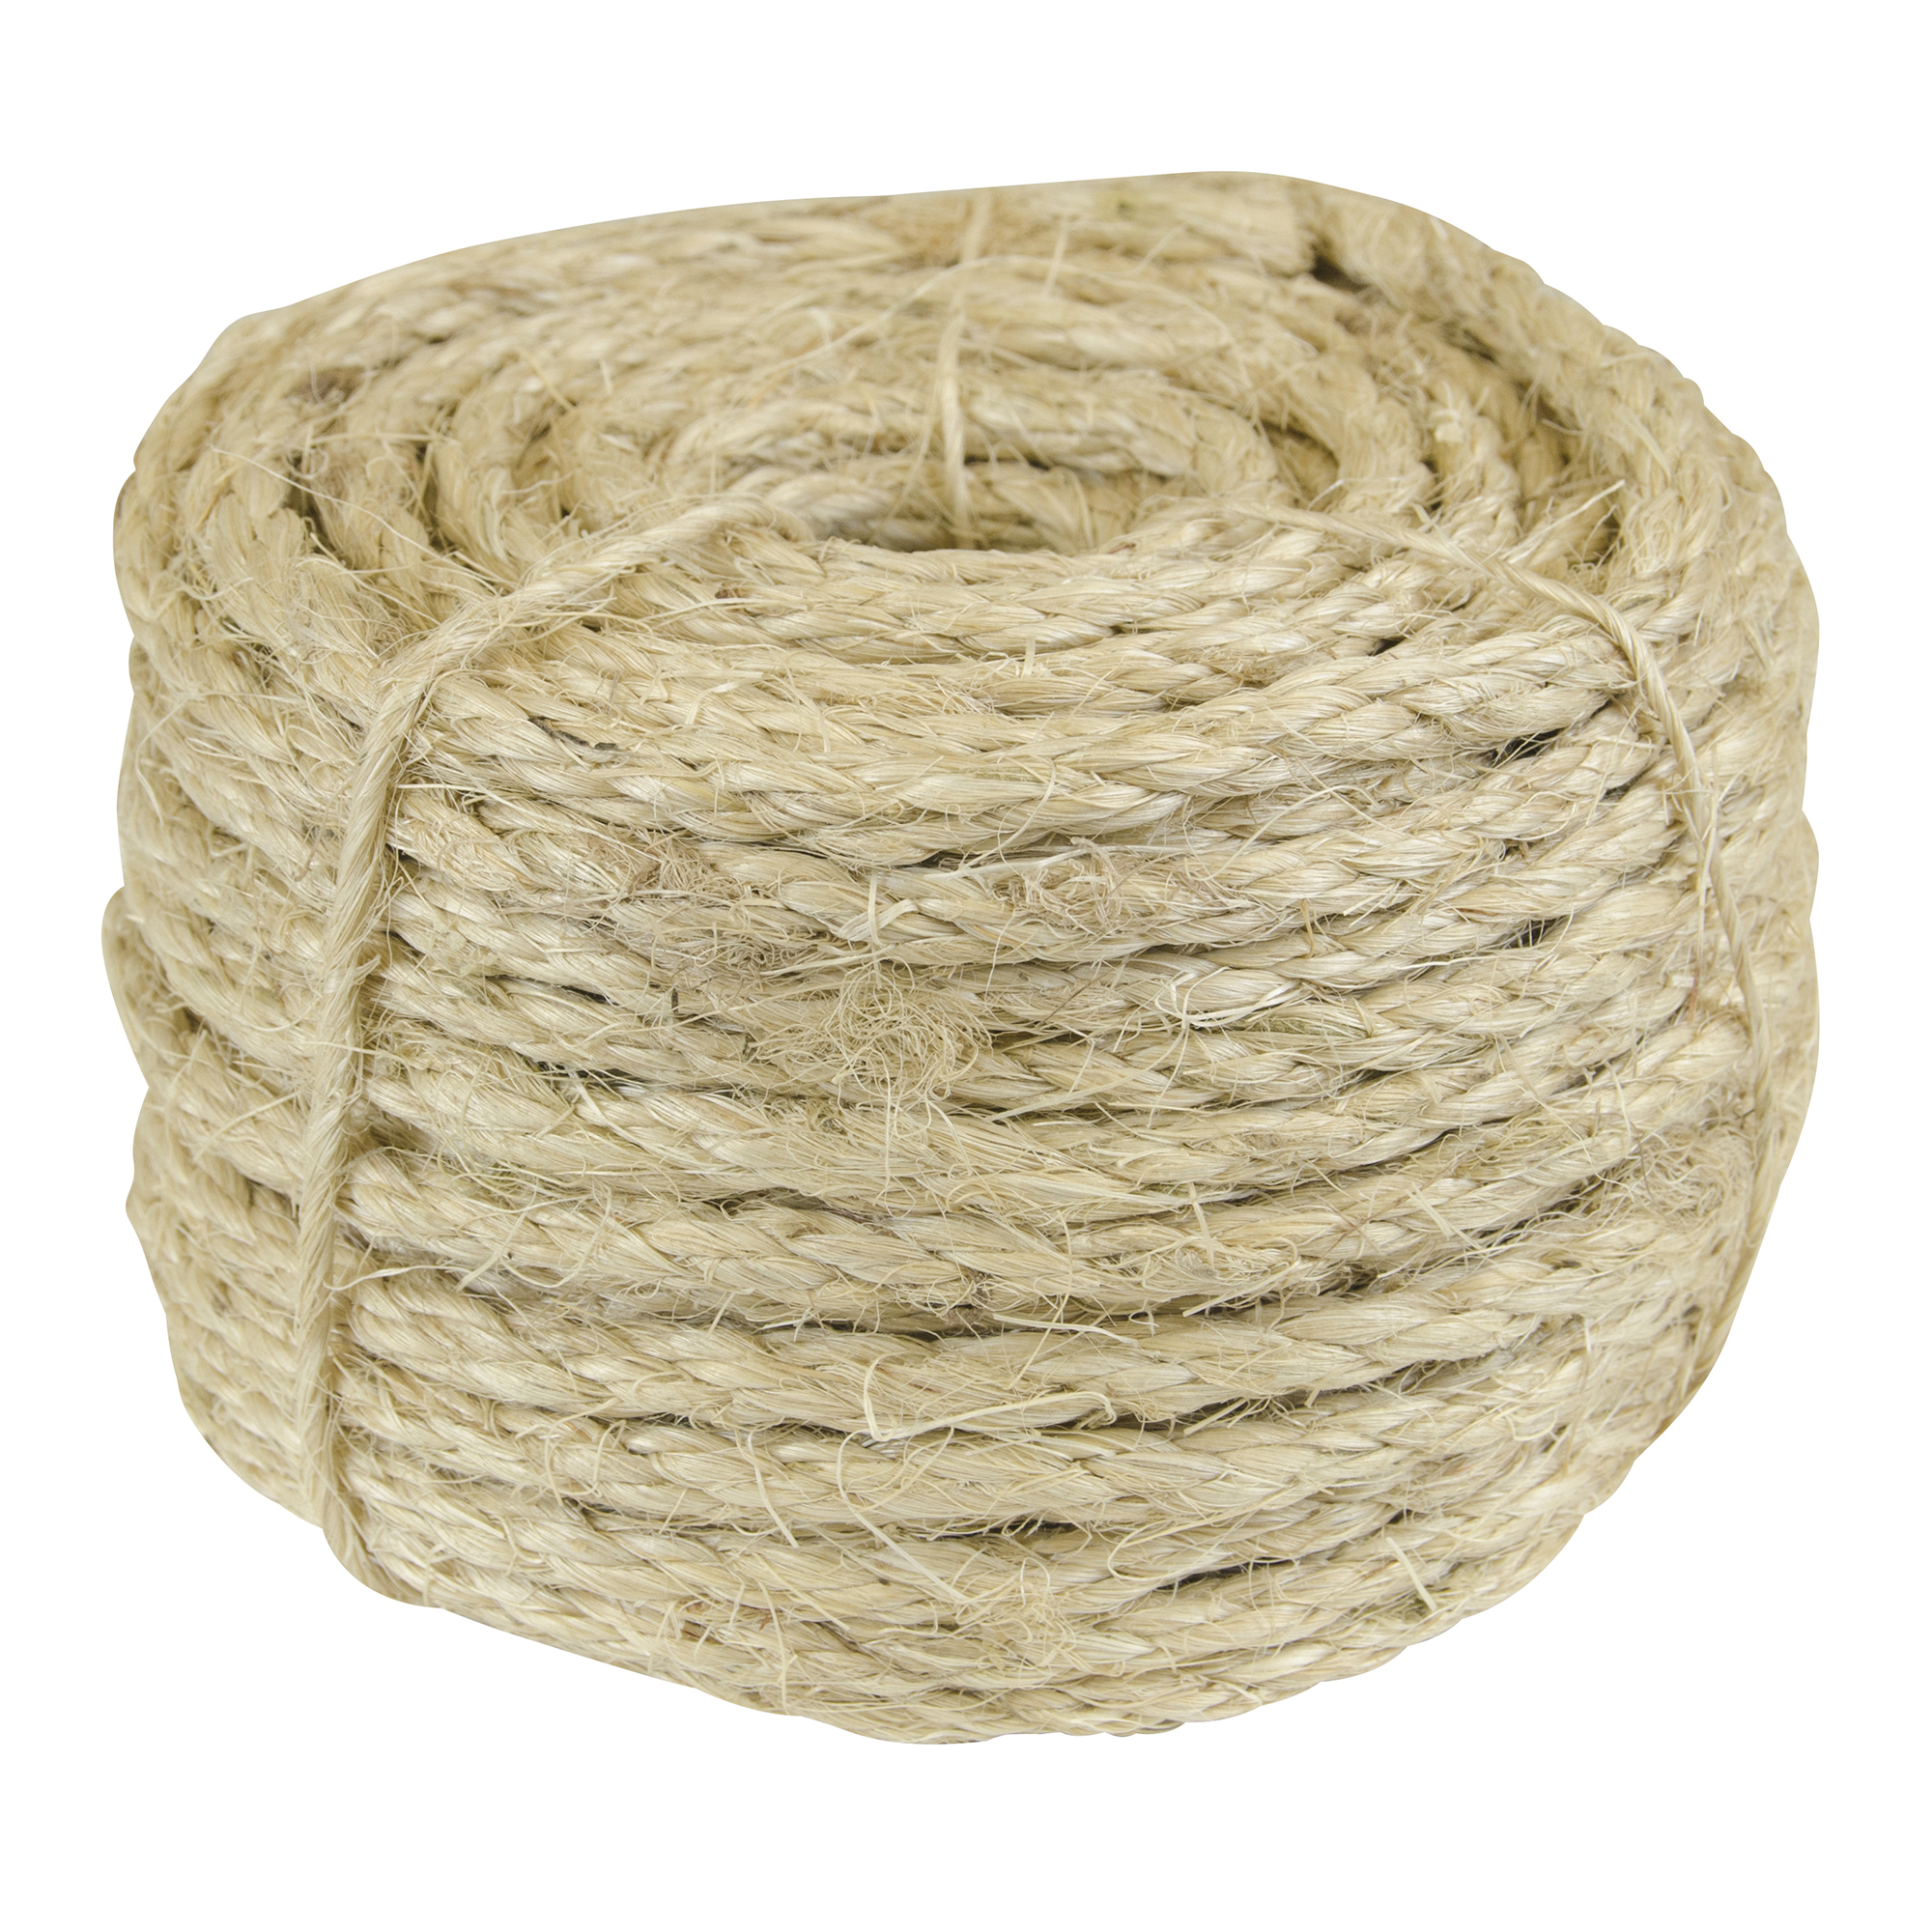 Hyper Tough 1/4" x 100' Sisal Twisted Rope, Beige - image 2 of 6